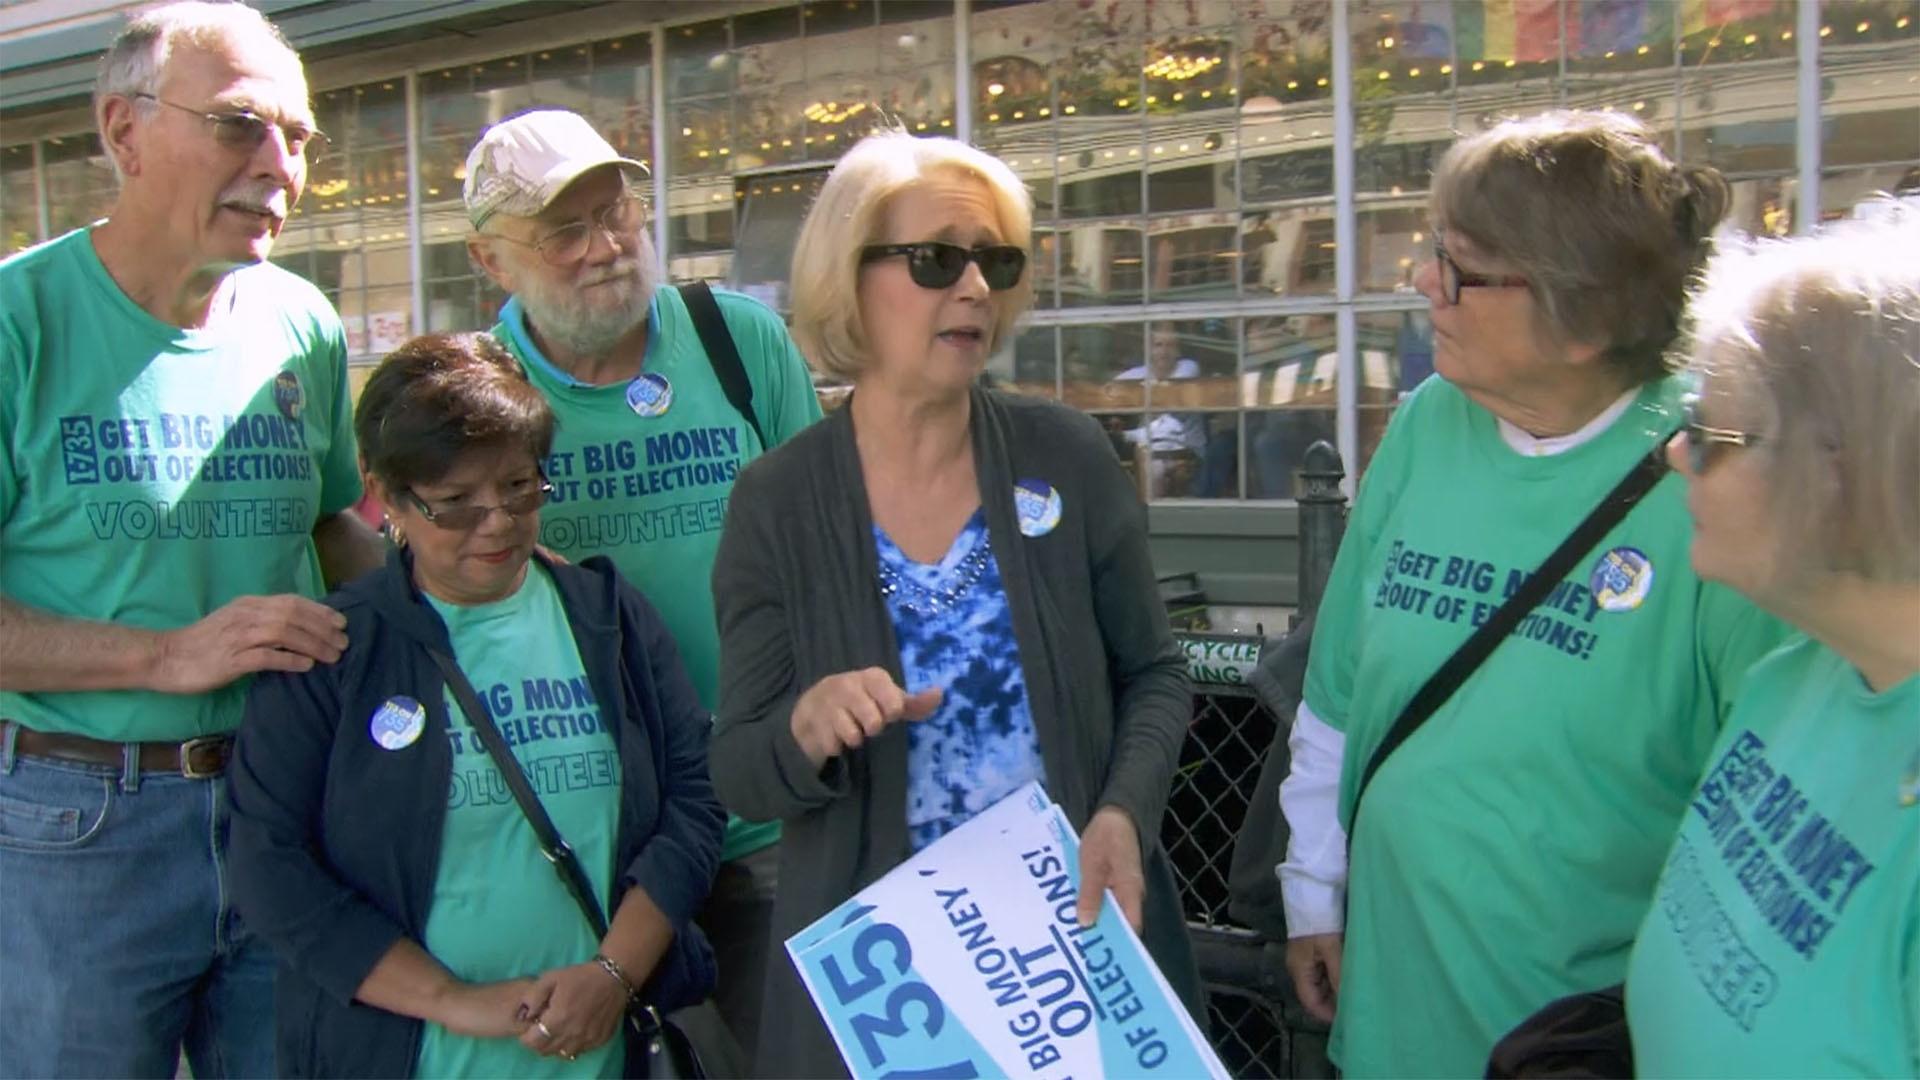 Image of Cindy Black and members of WAmend coalition.